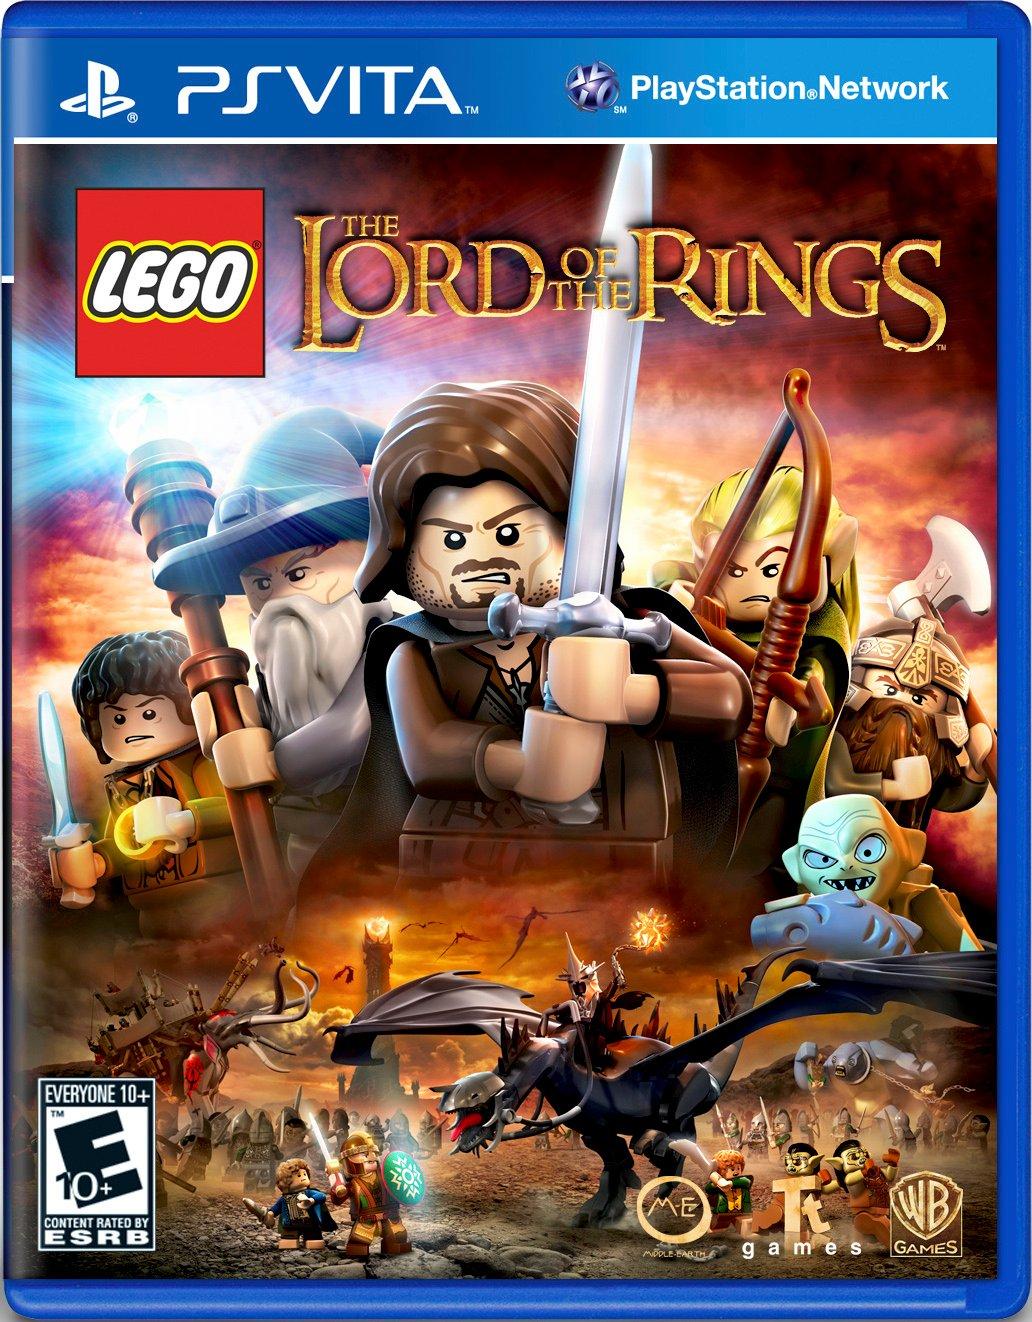 lego lord of the rings wii u